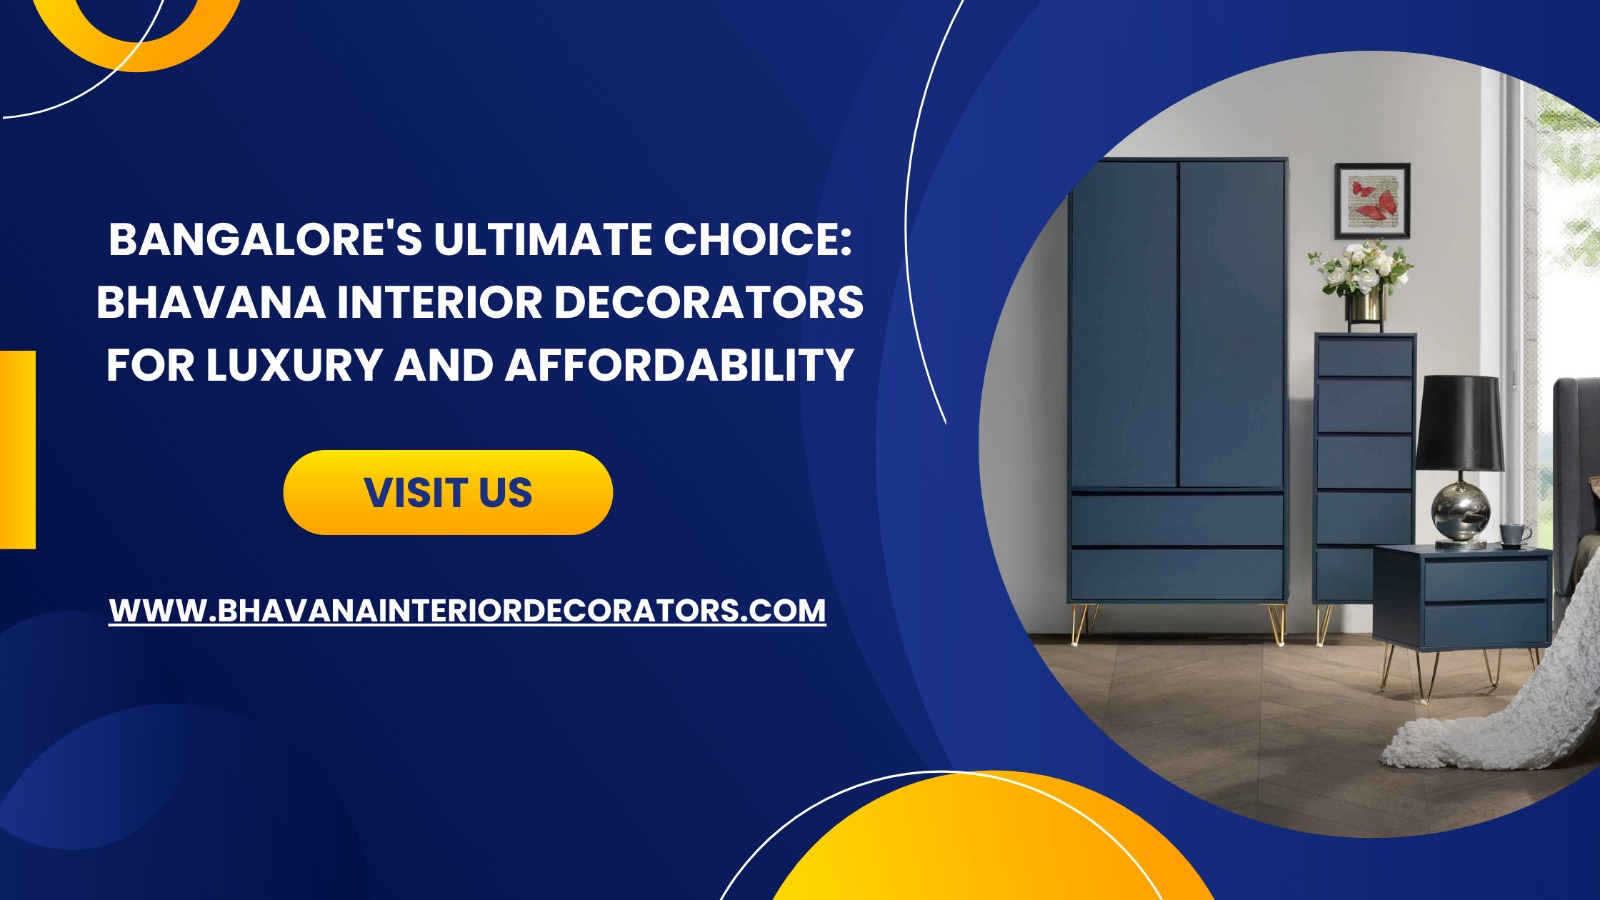 Bangalore's Ultimate Choice: Bhavana Interior Decorators for Luxury and Affordability